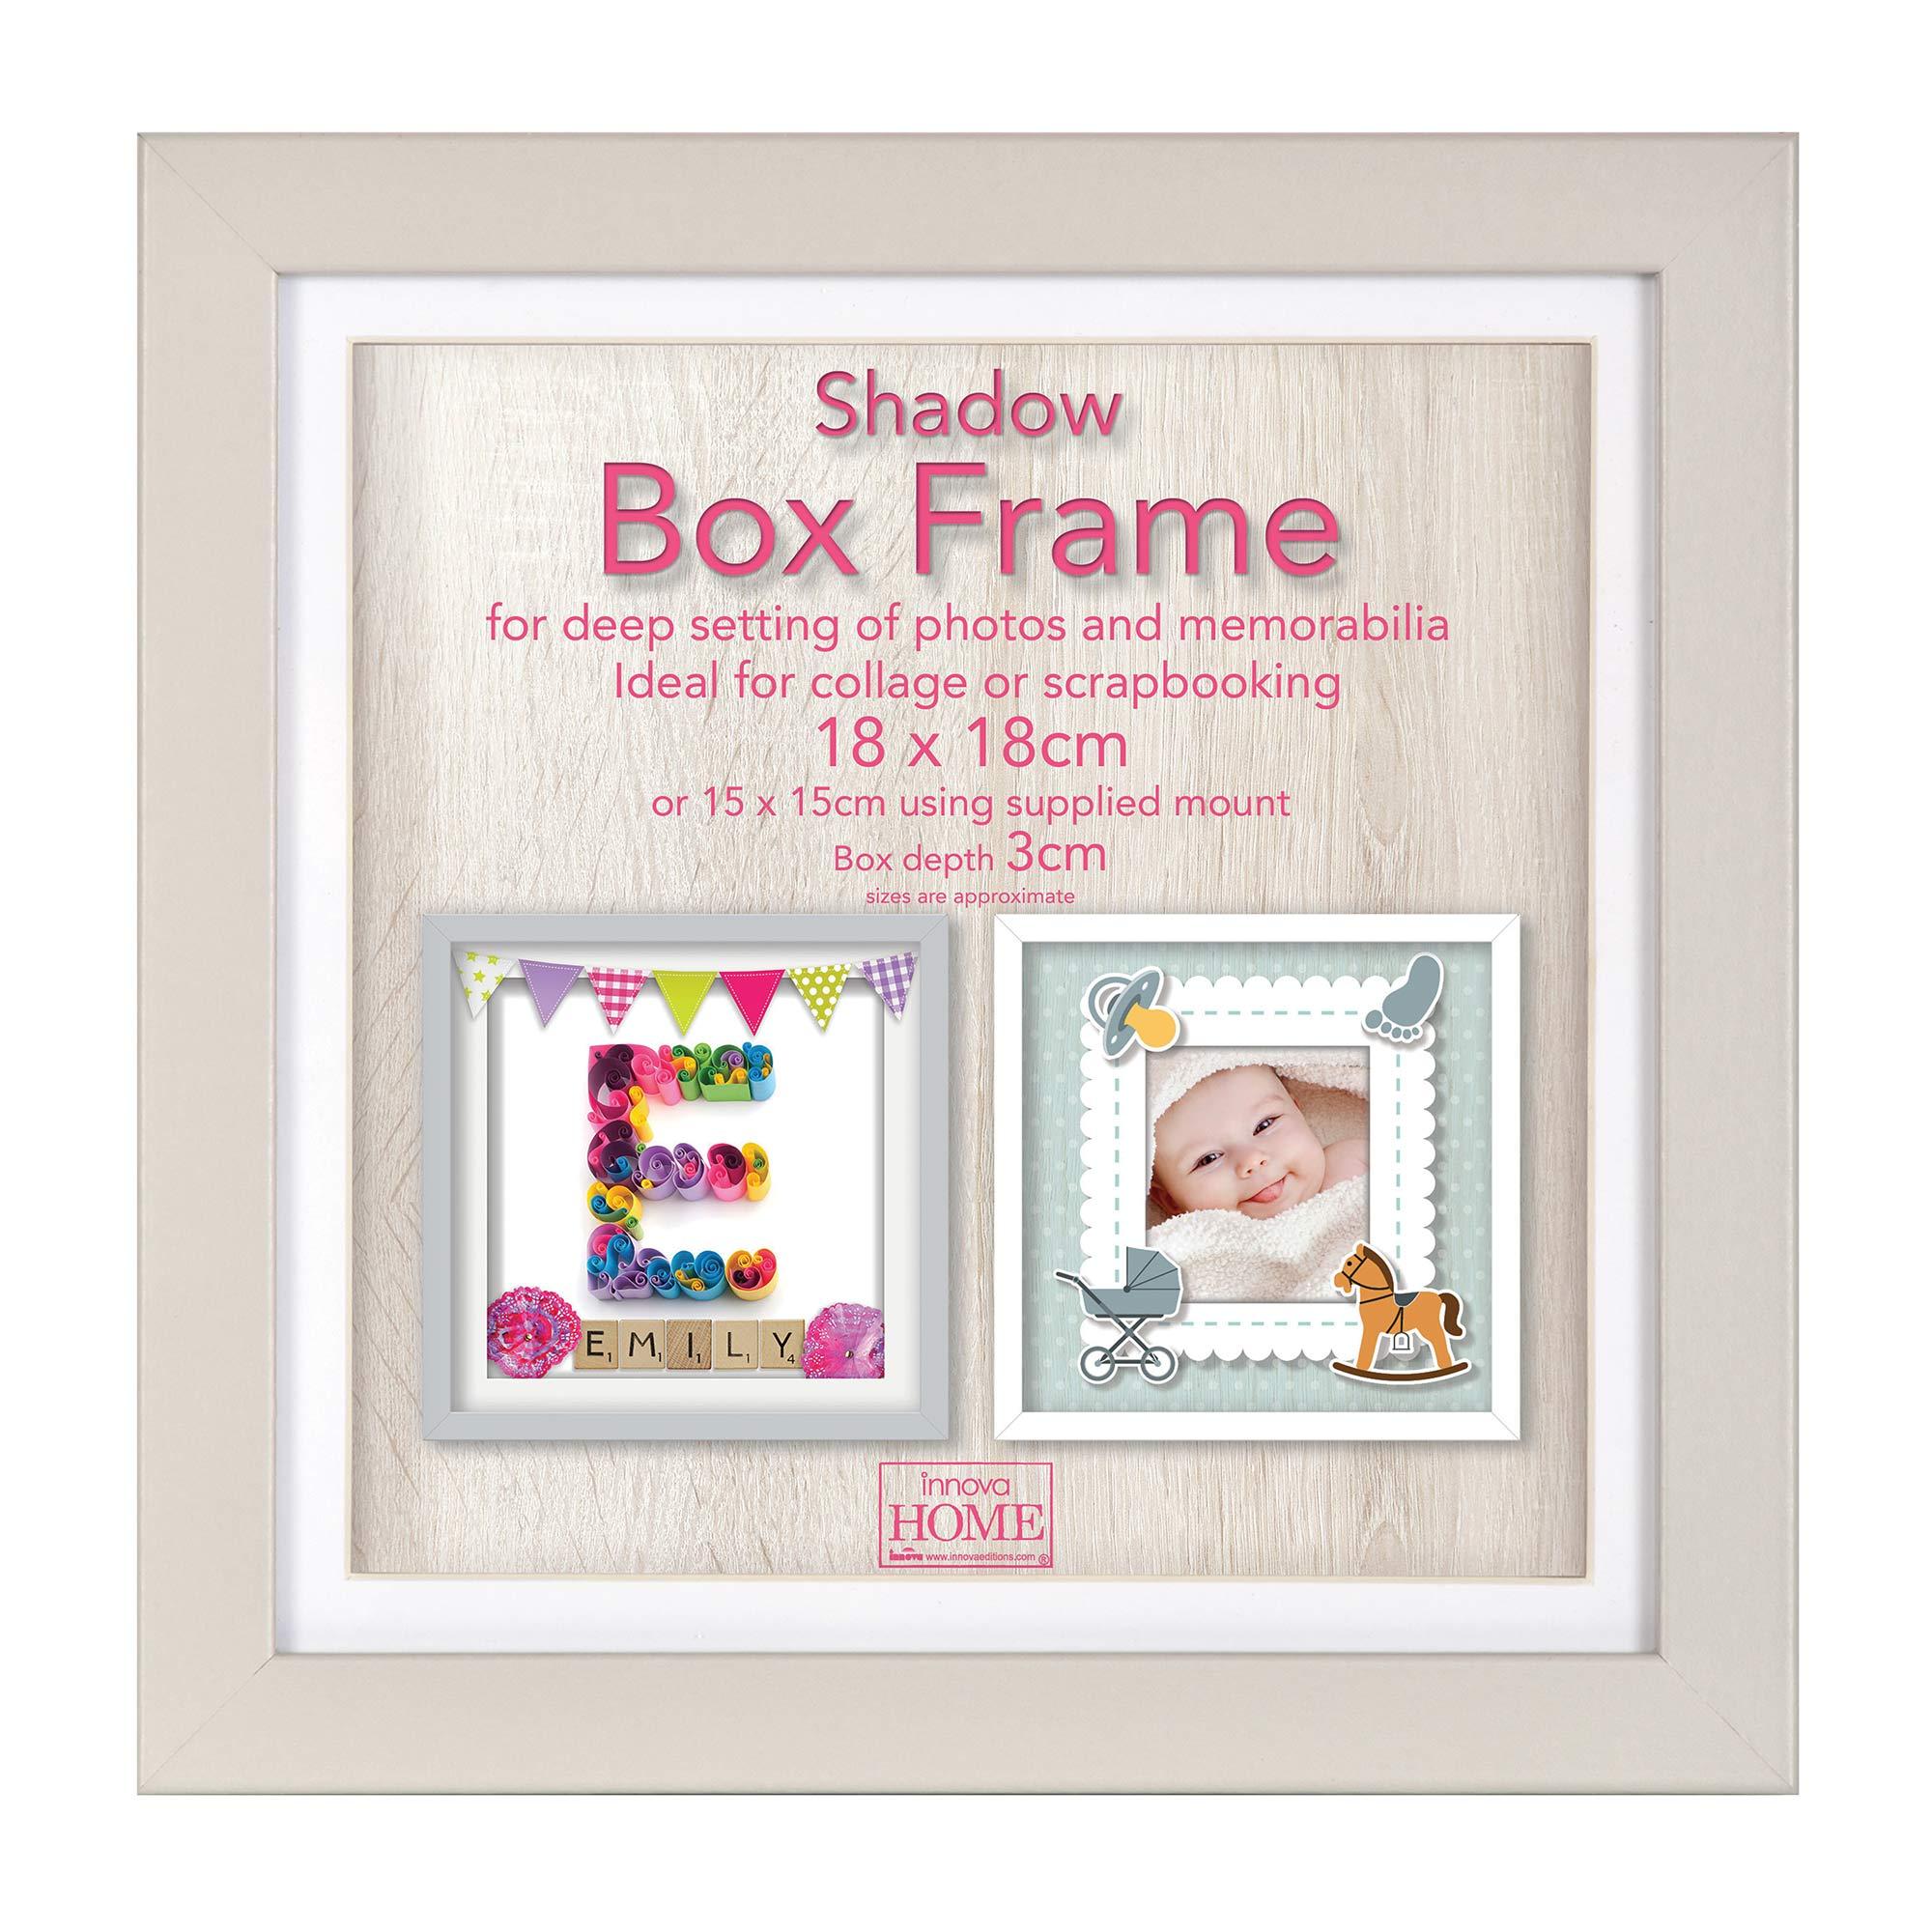 Grey Shadow Box Deep Frame - 10x10 with mount or 12x12 without